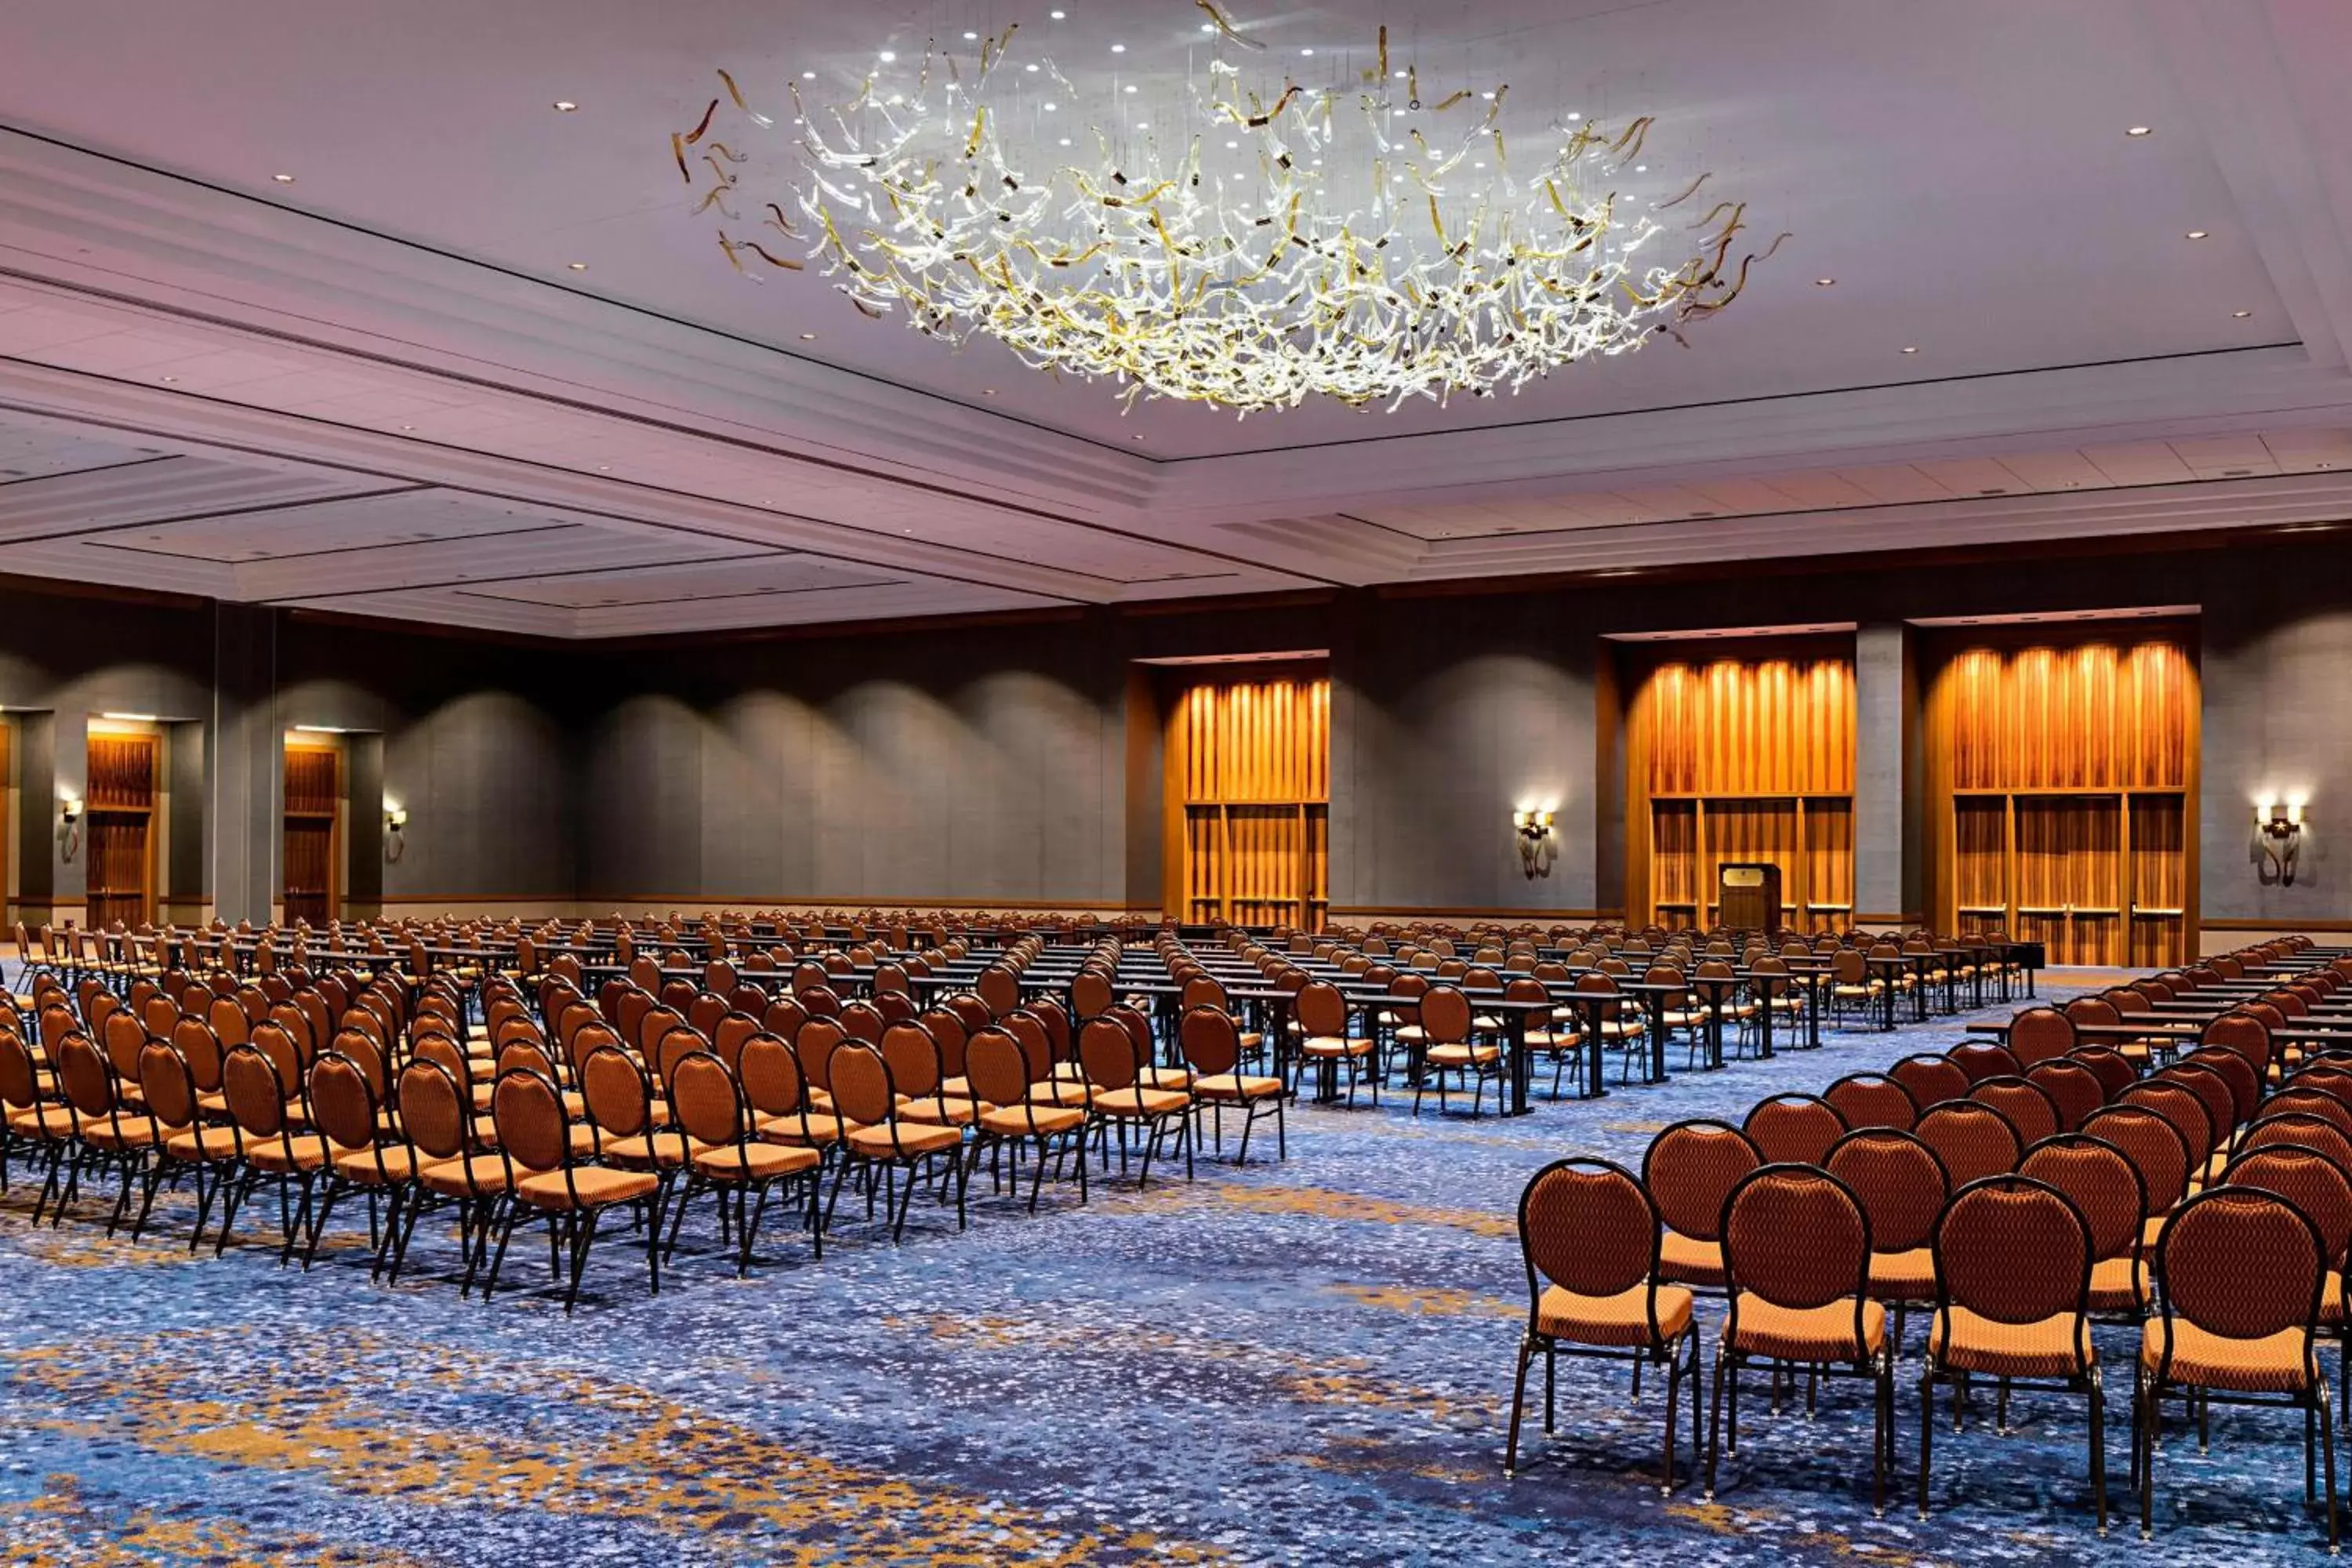 Meeting/conference room, Banquet Facilities in Gaylord Texan Resort and Convention Center